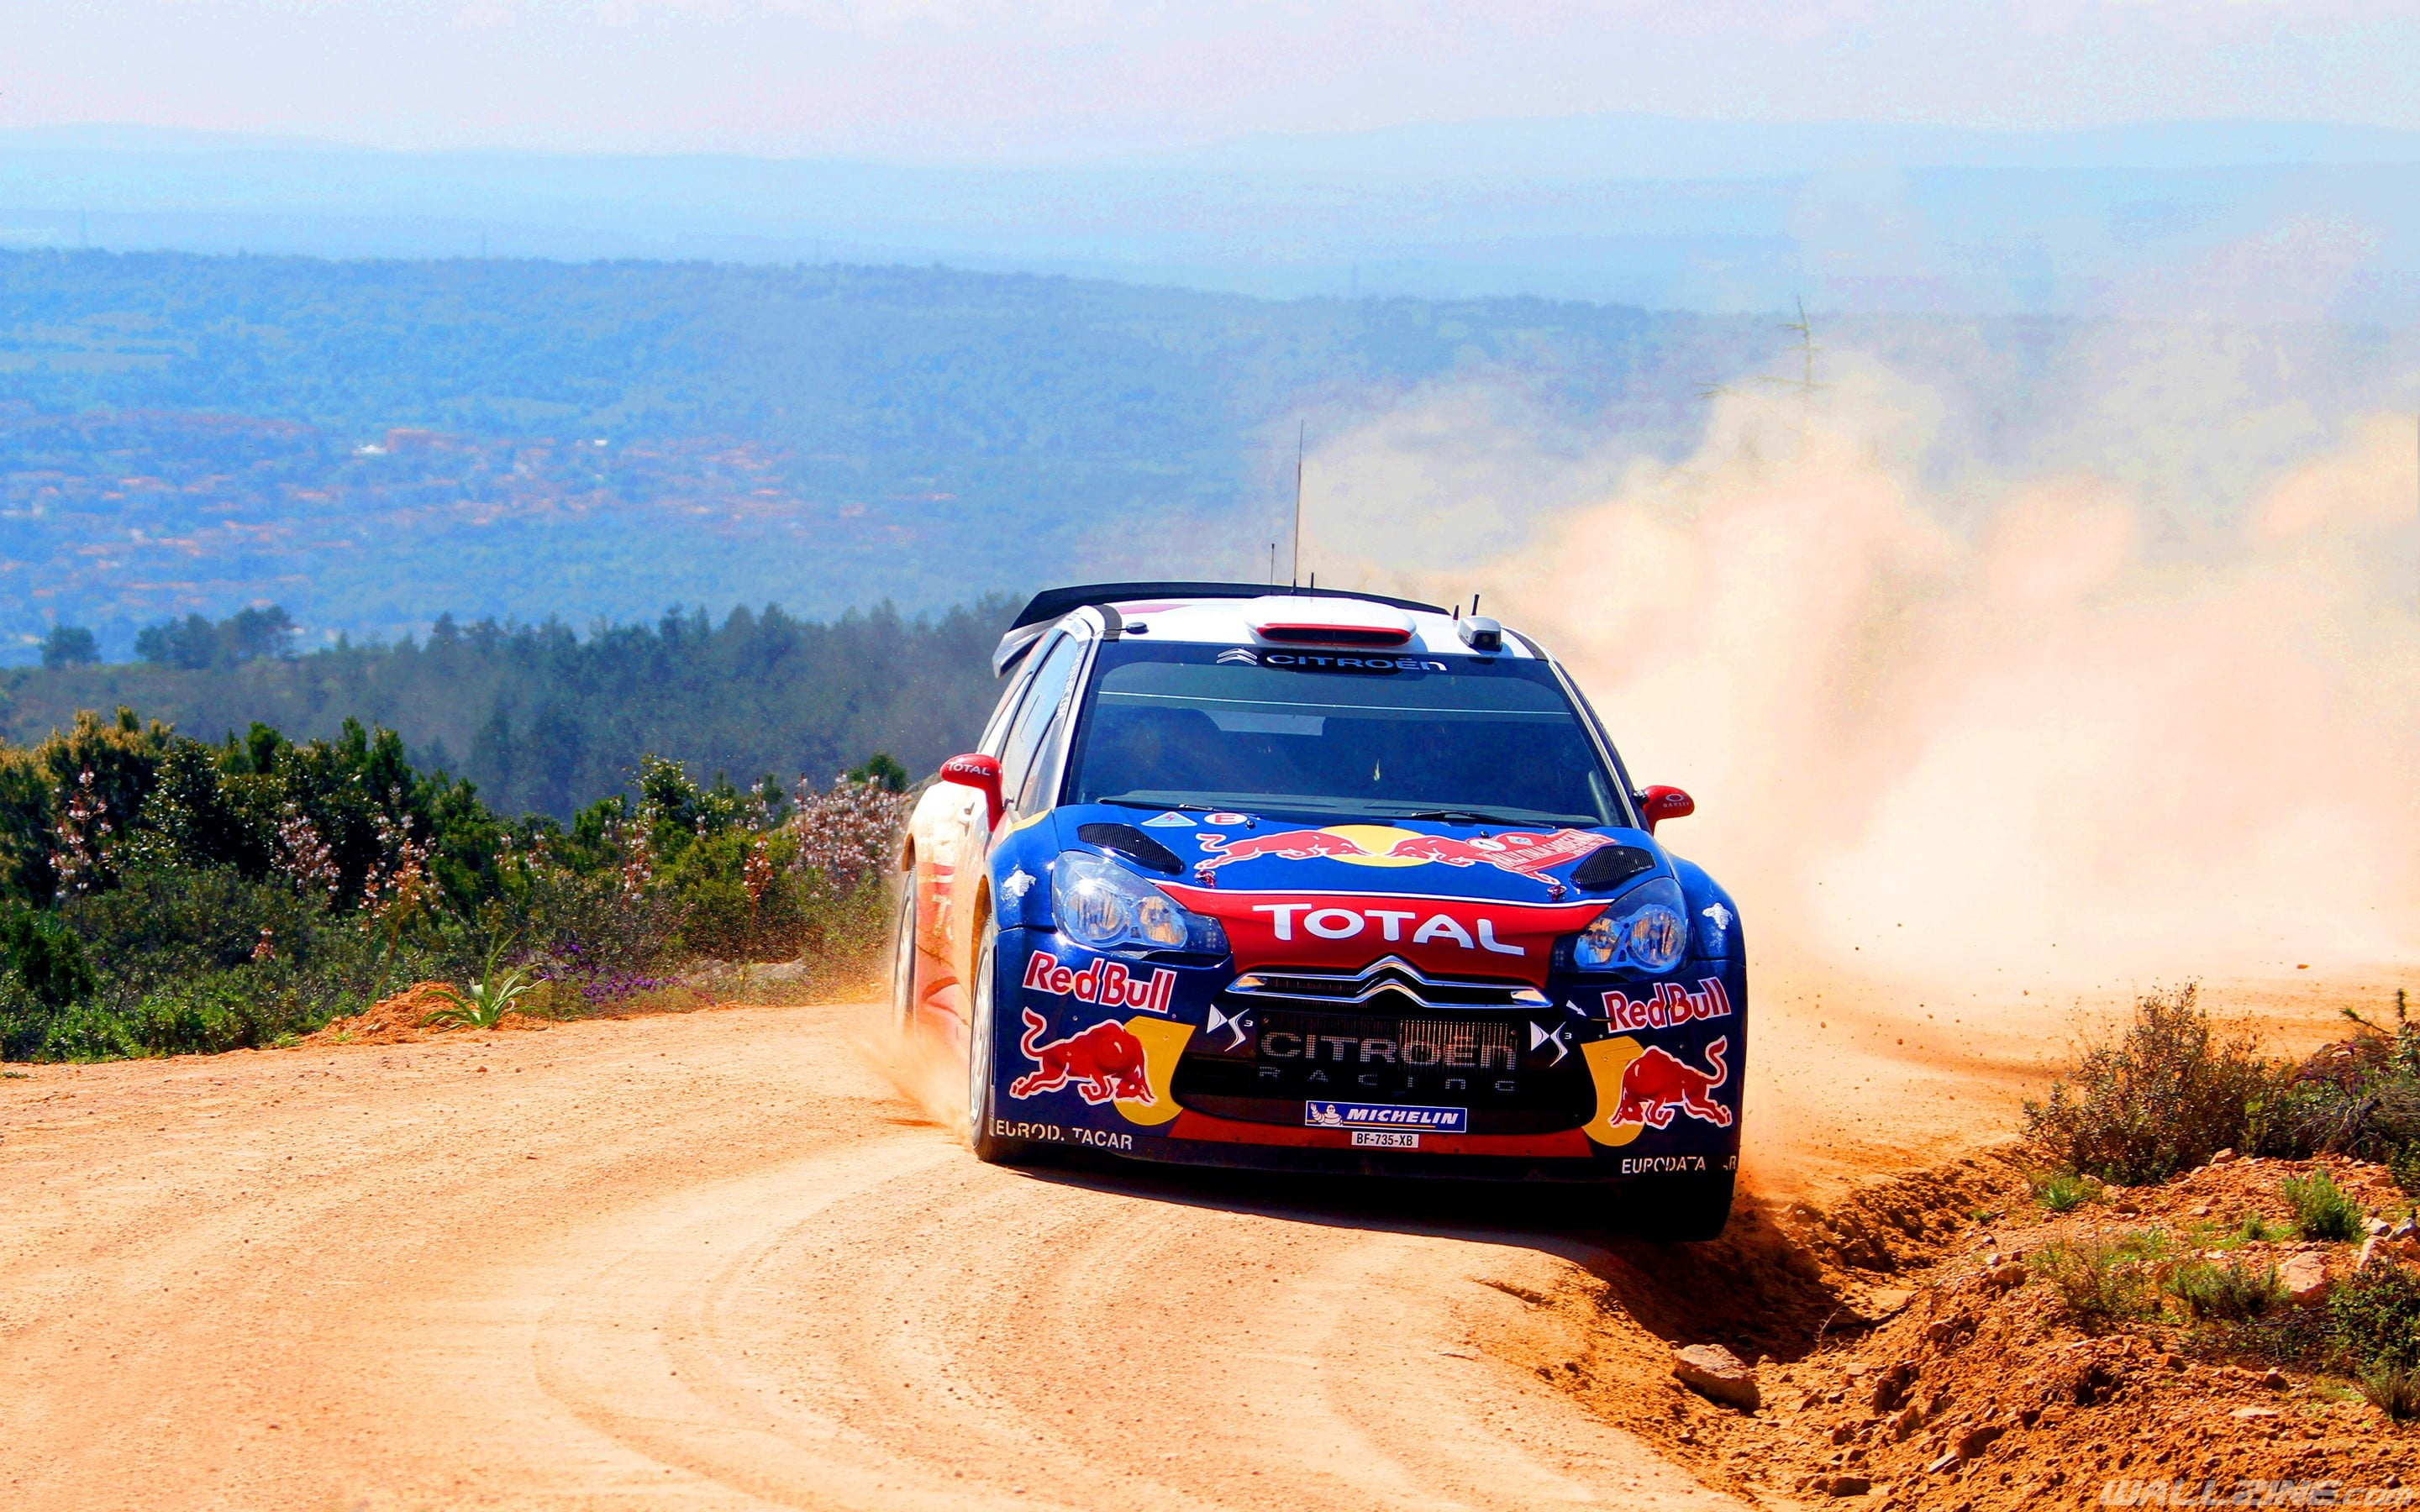 2880x1800 Blue and red racing car, car, Red Bull, rally cars, Rally HD wallpaper |